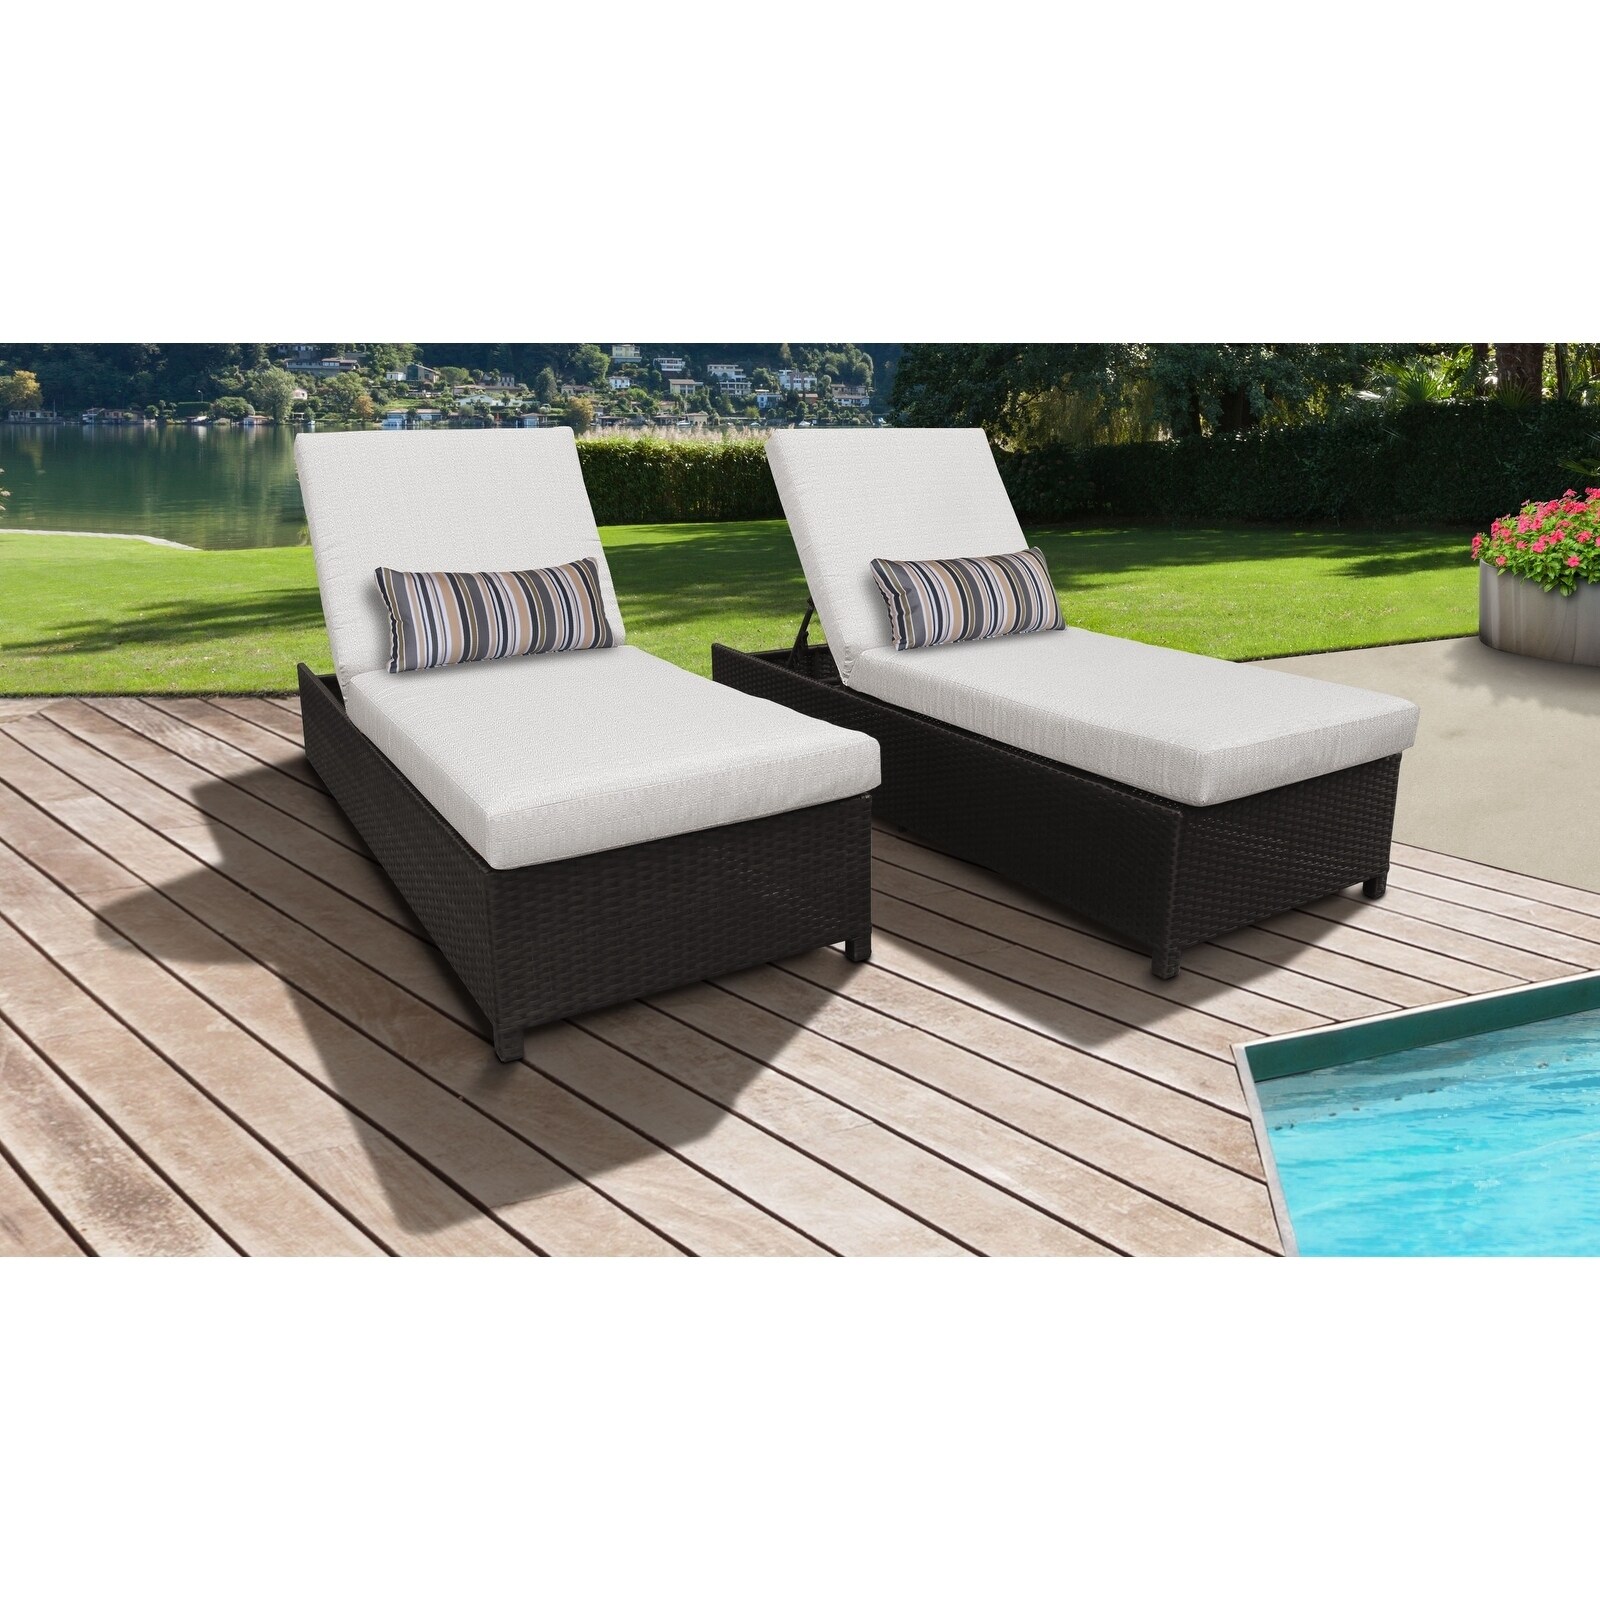 Belle Wheeled Chaise Set Of 2 Outdoor Wicker Patio Furniture